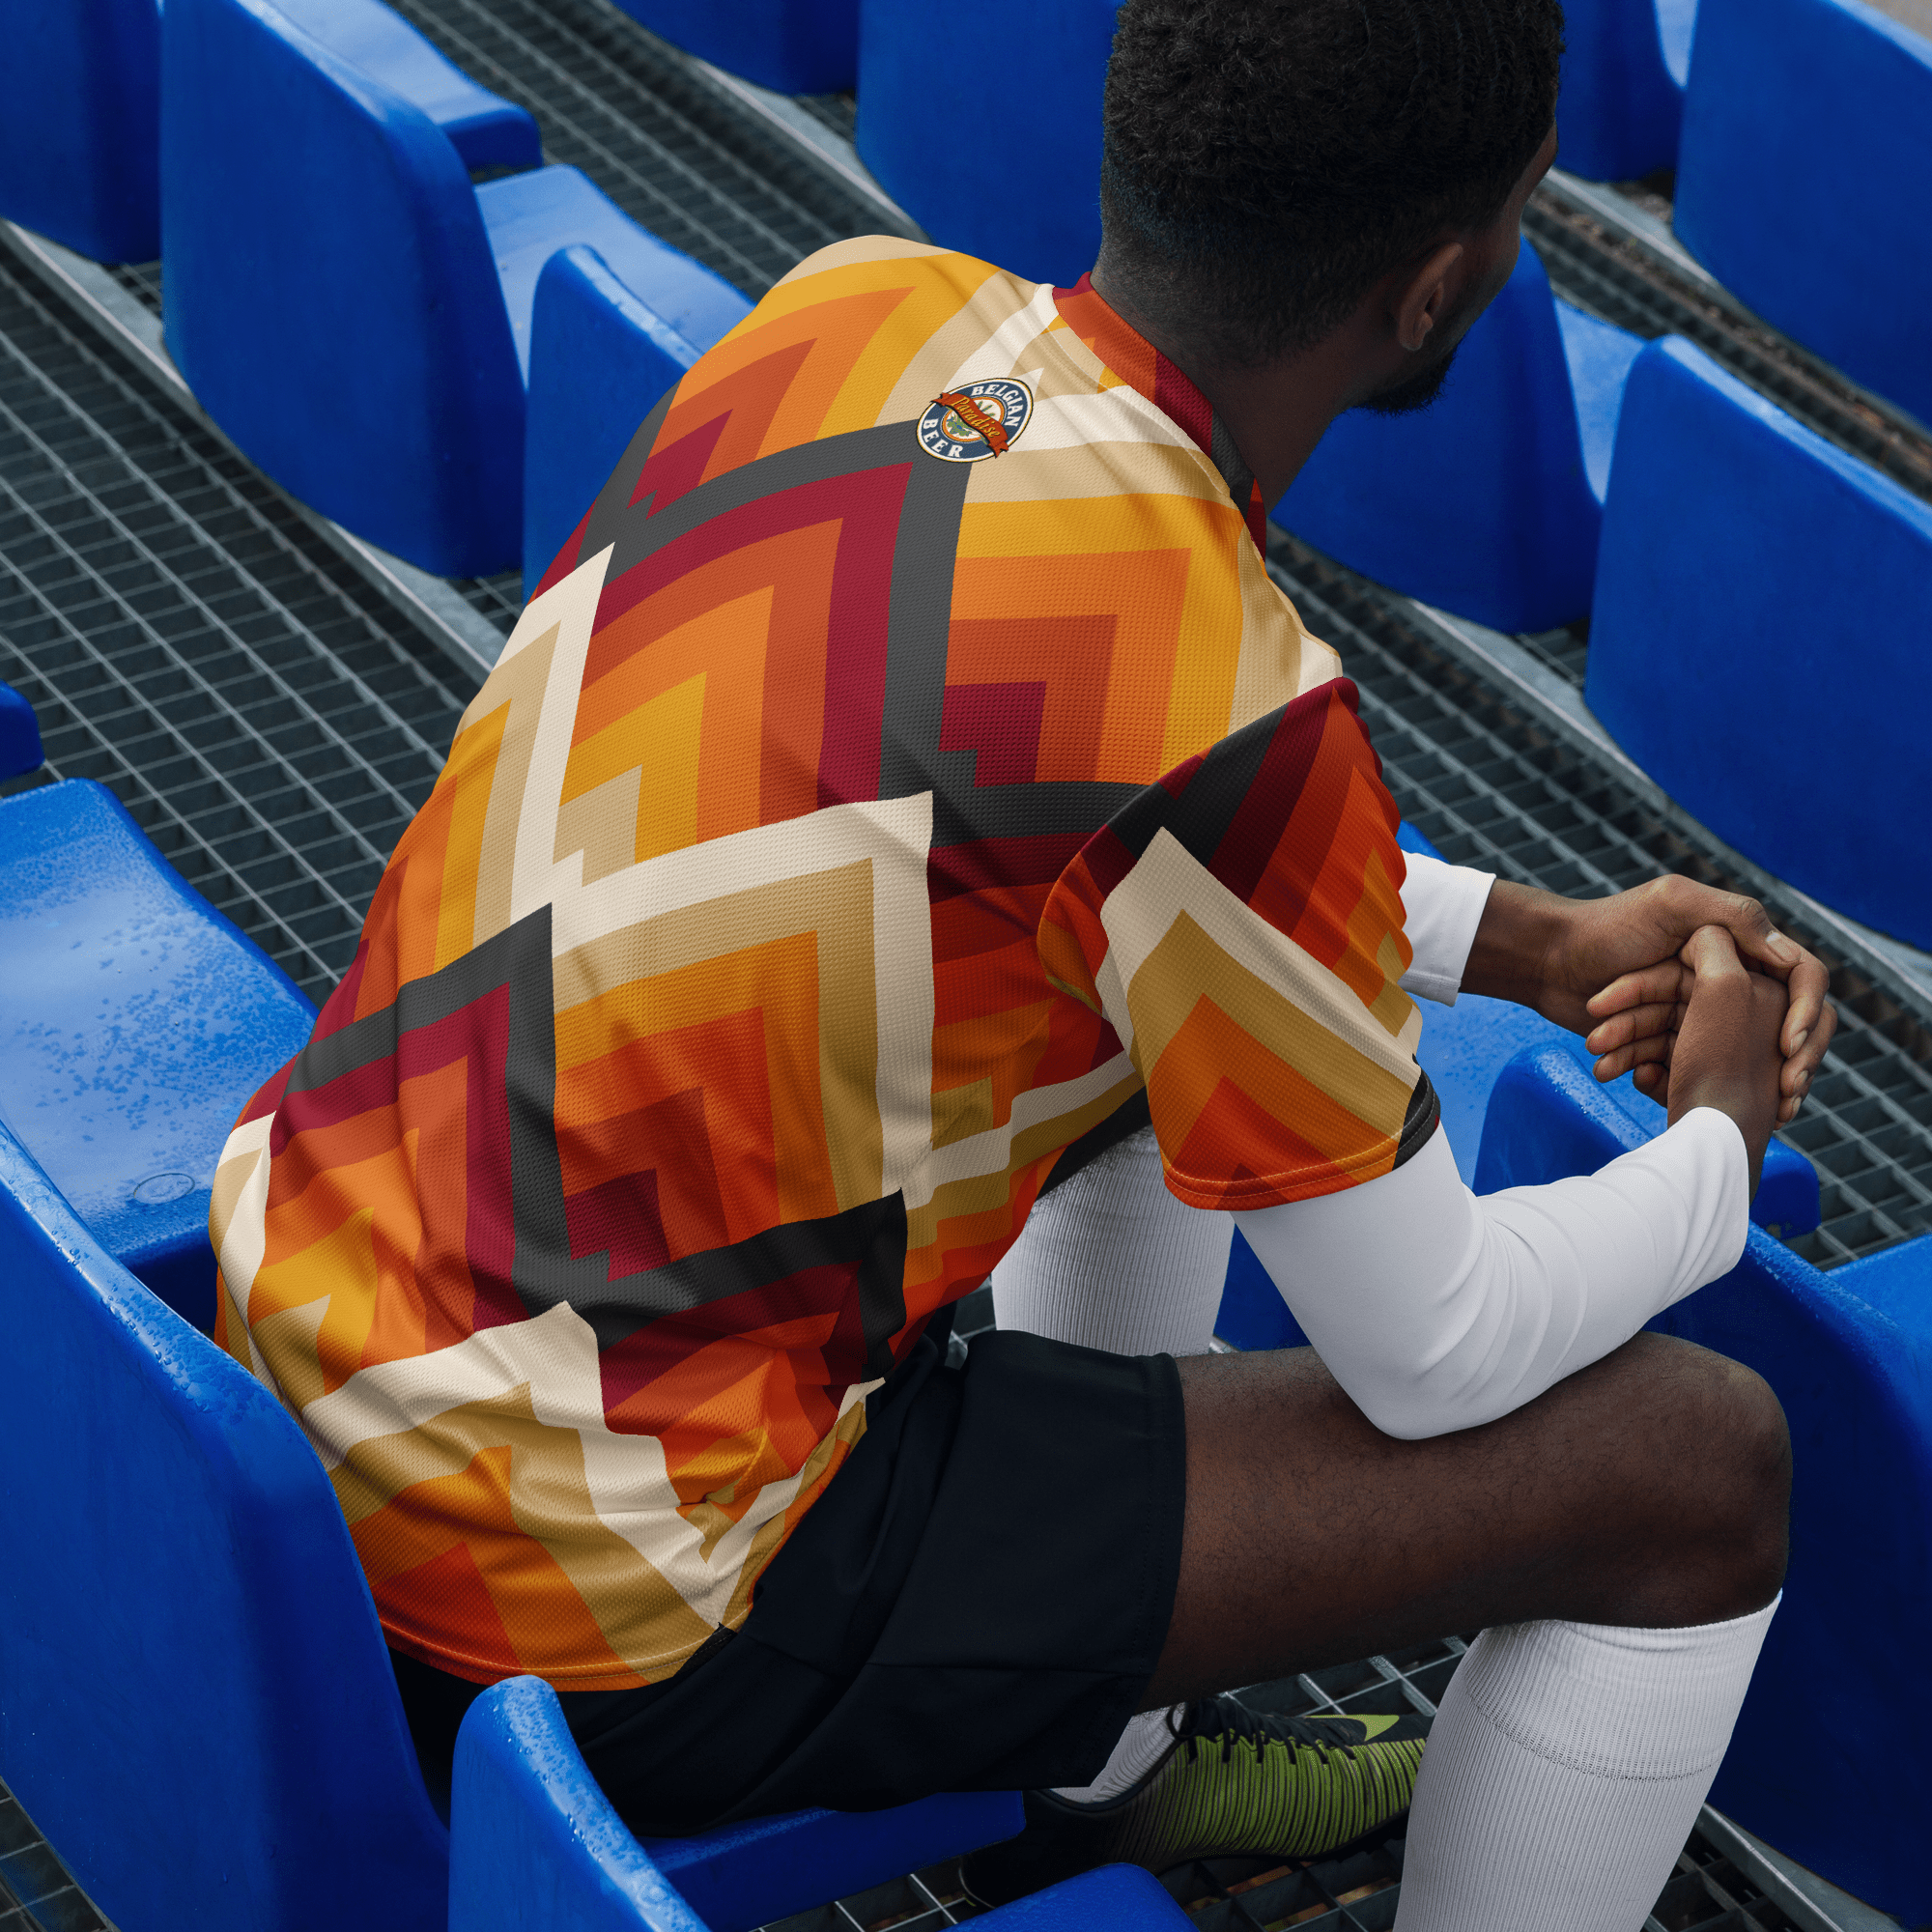 Belgium 2022 World Cup home kit: The most divisive… ever